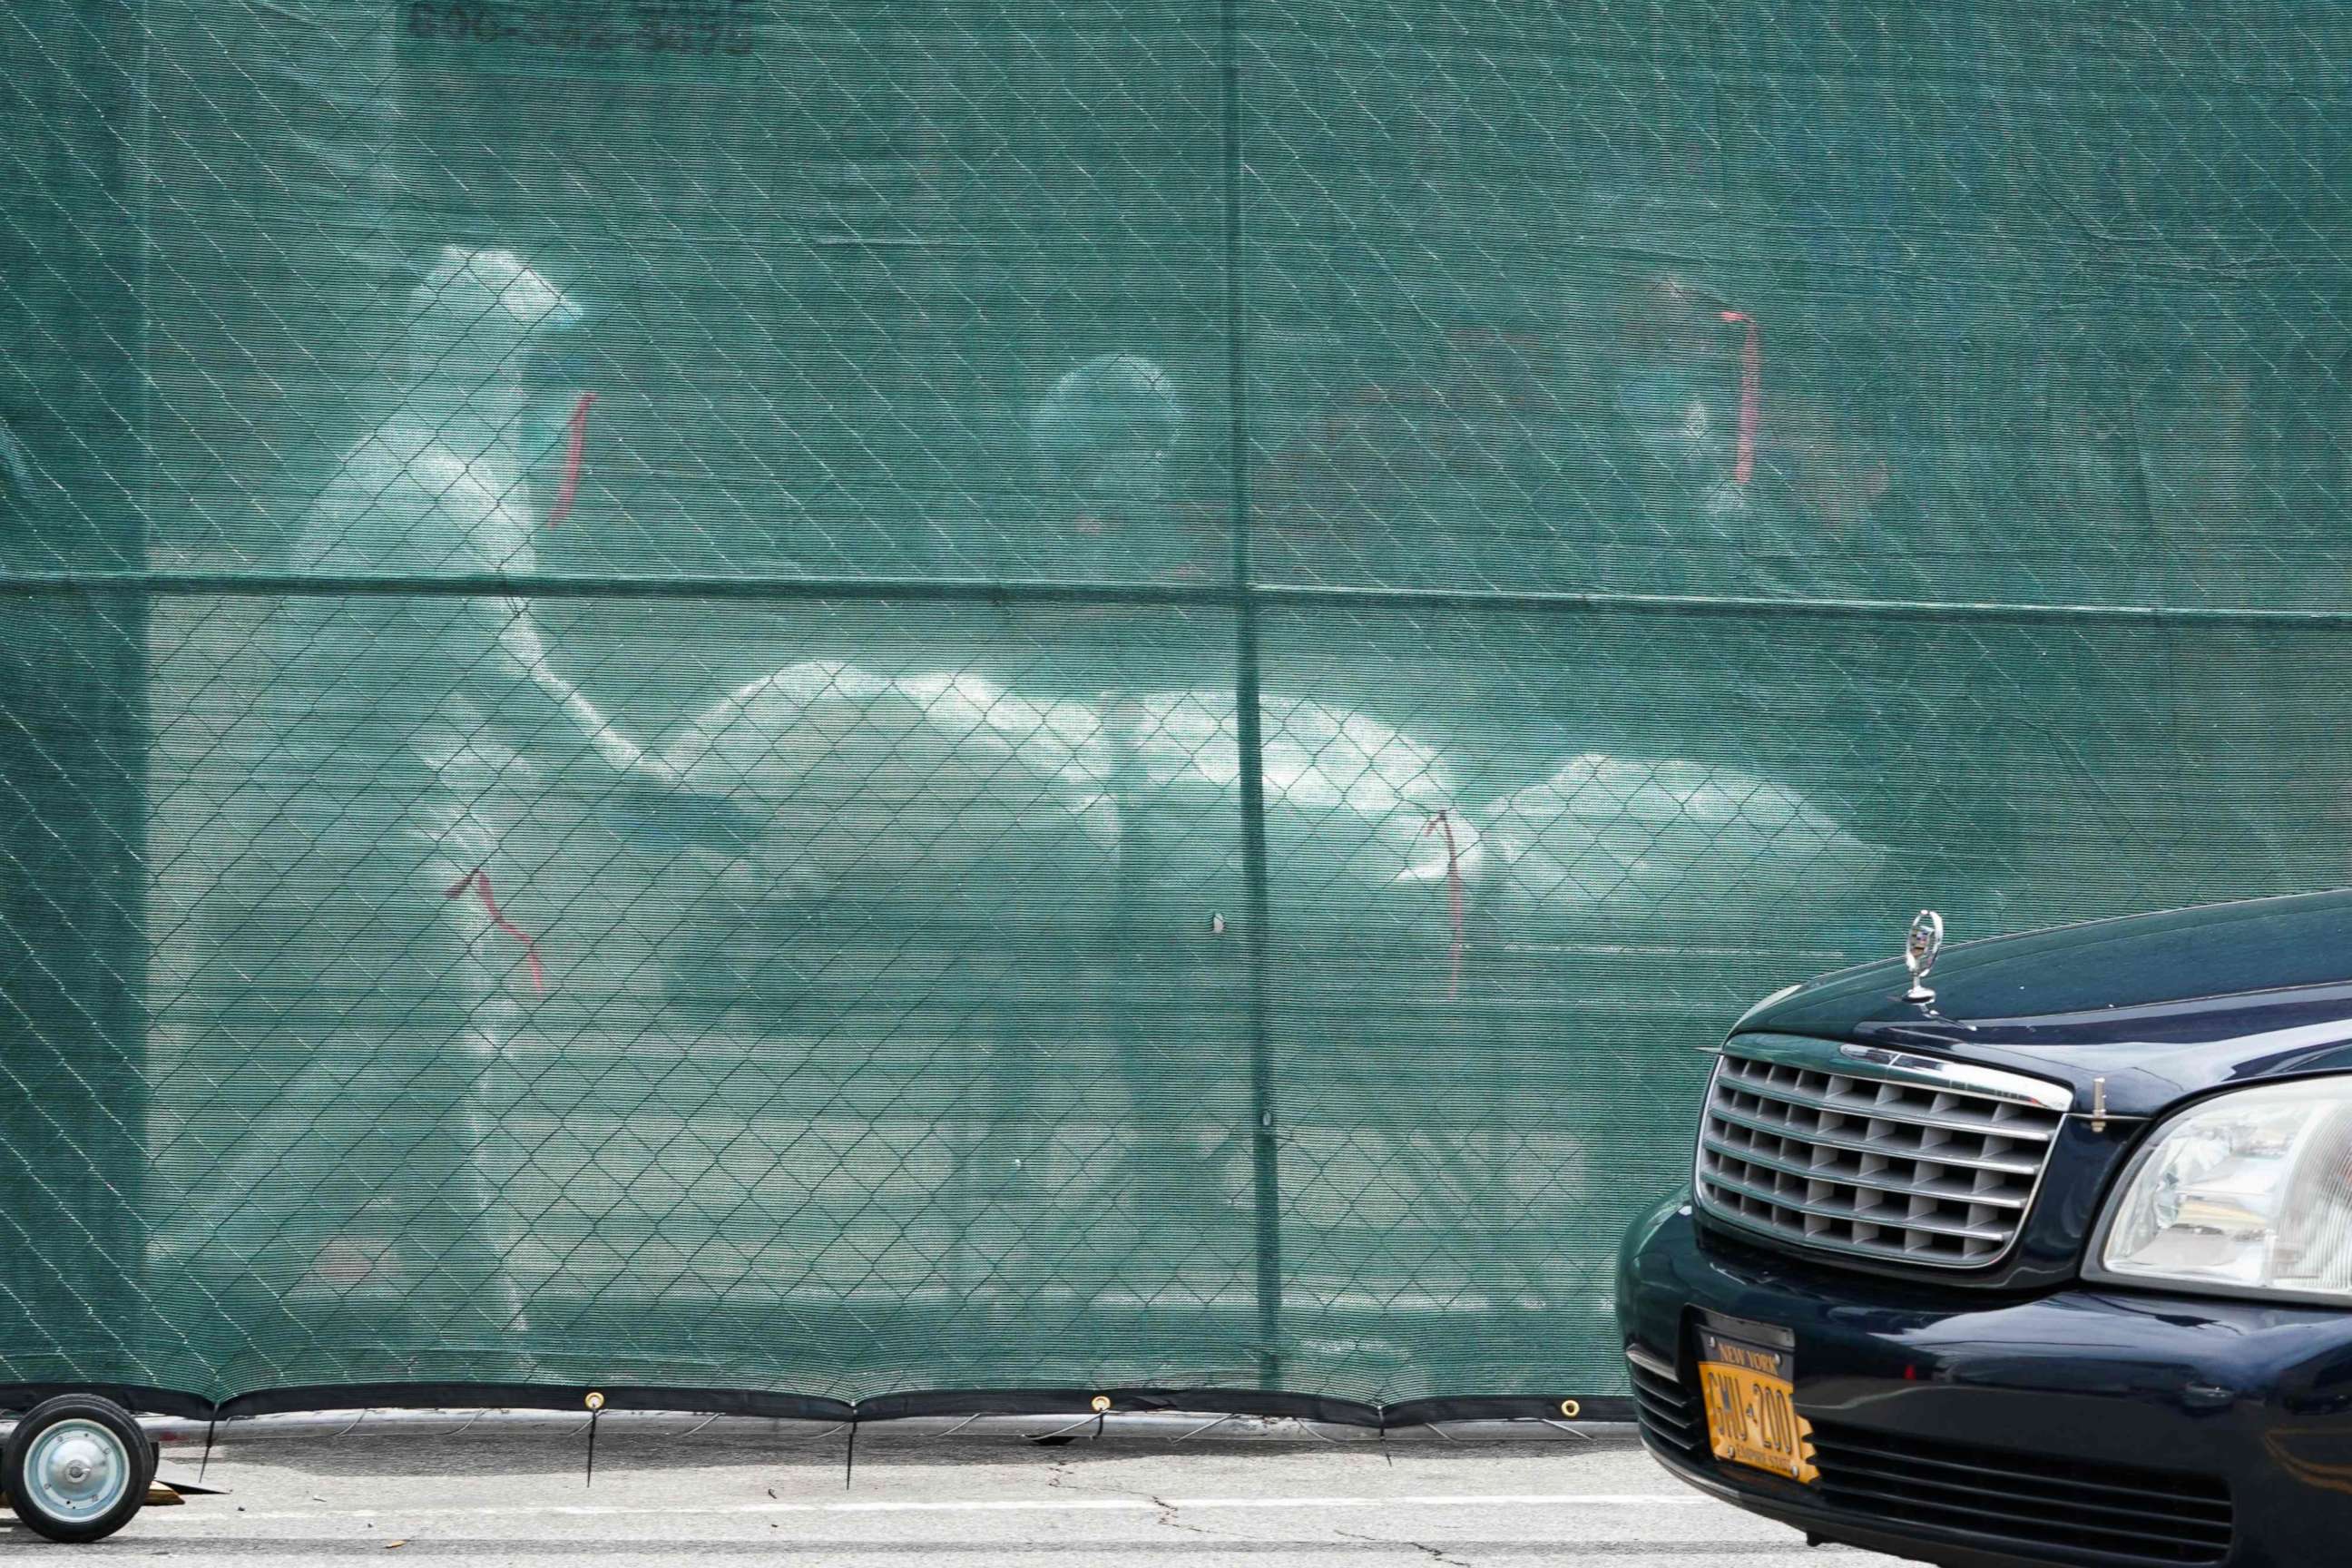 PHOTO: A body is removed from a refrigeration truck serving as a temporary morgue at the Brooklyn Hospital Center in the New York City borough of Brooklyn on April 8, 2020.